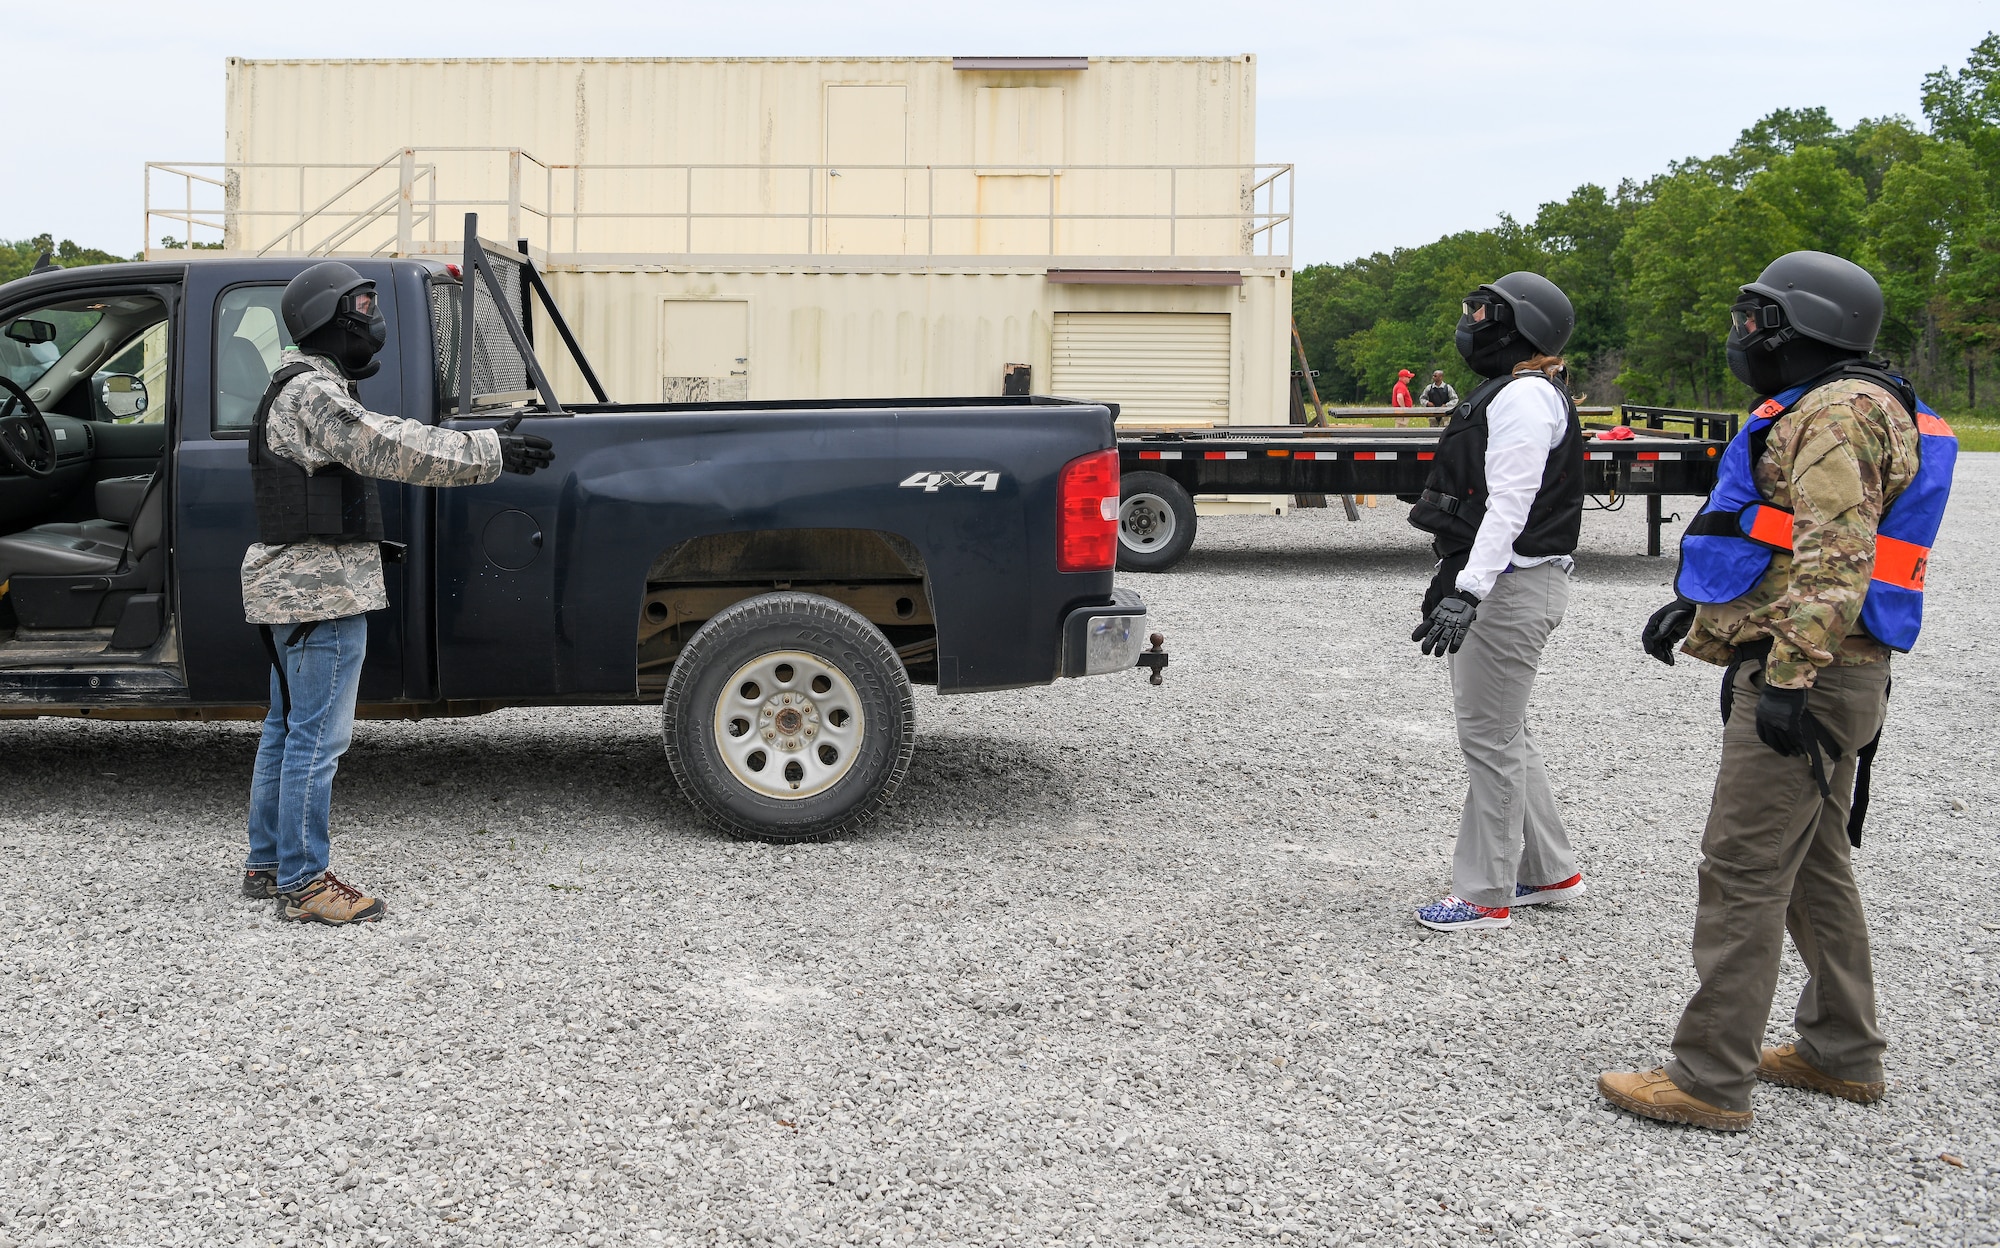 Two men and a woman in protective gear for training with Simunitions weapons engage in a mock traffic stop